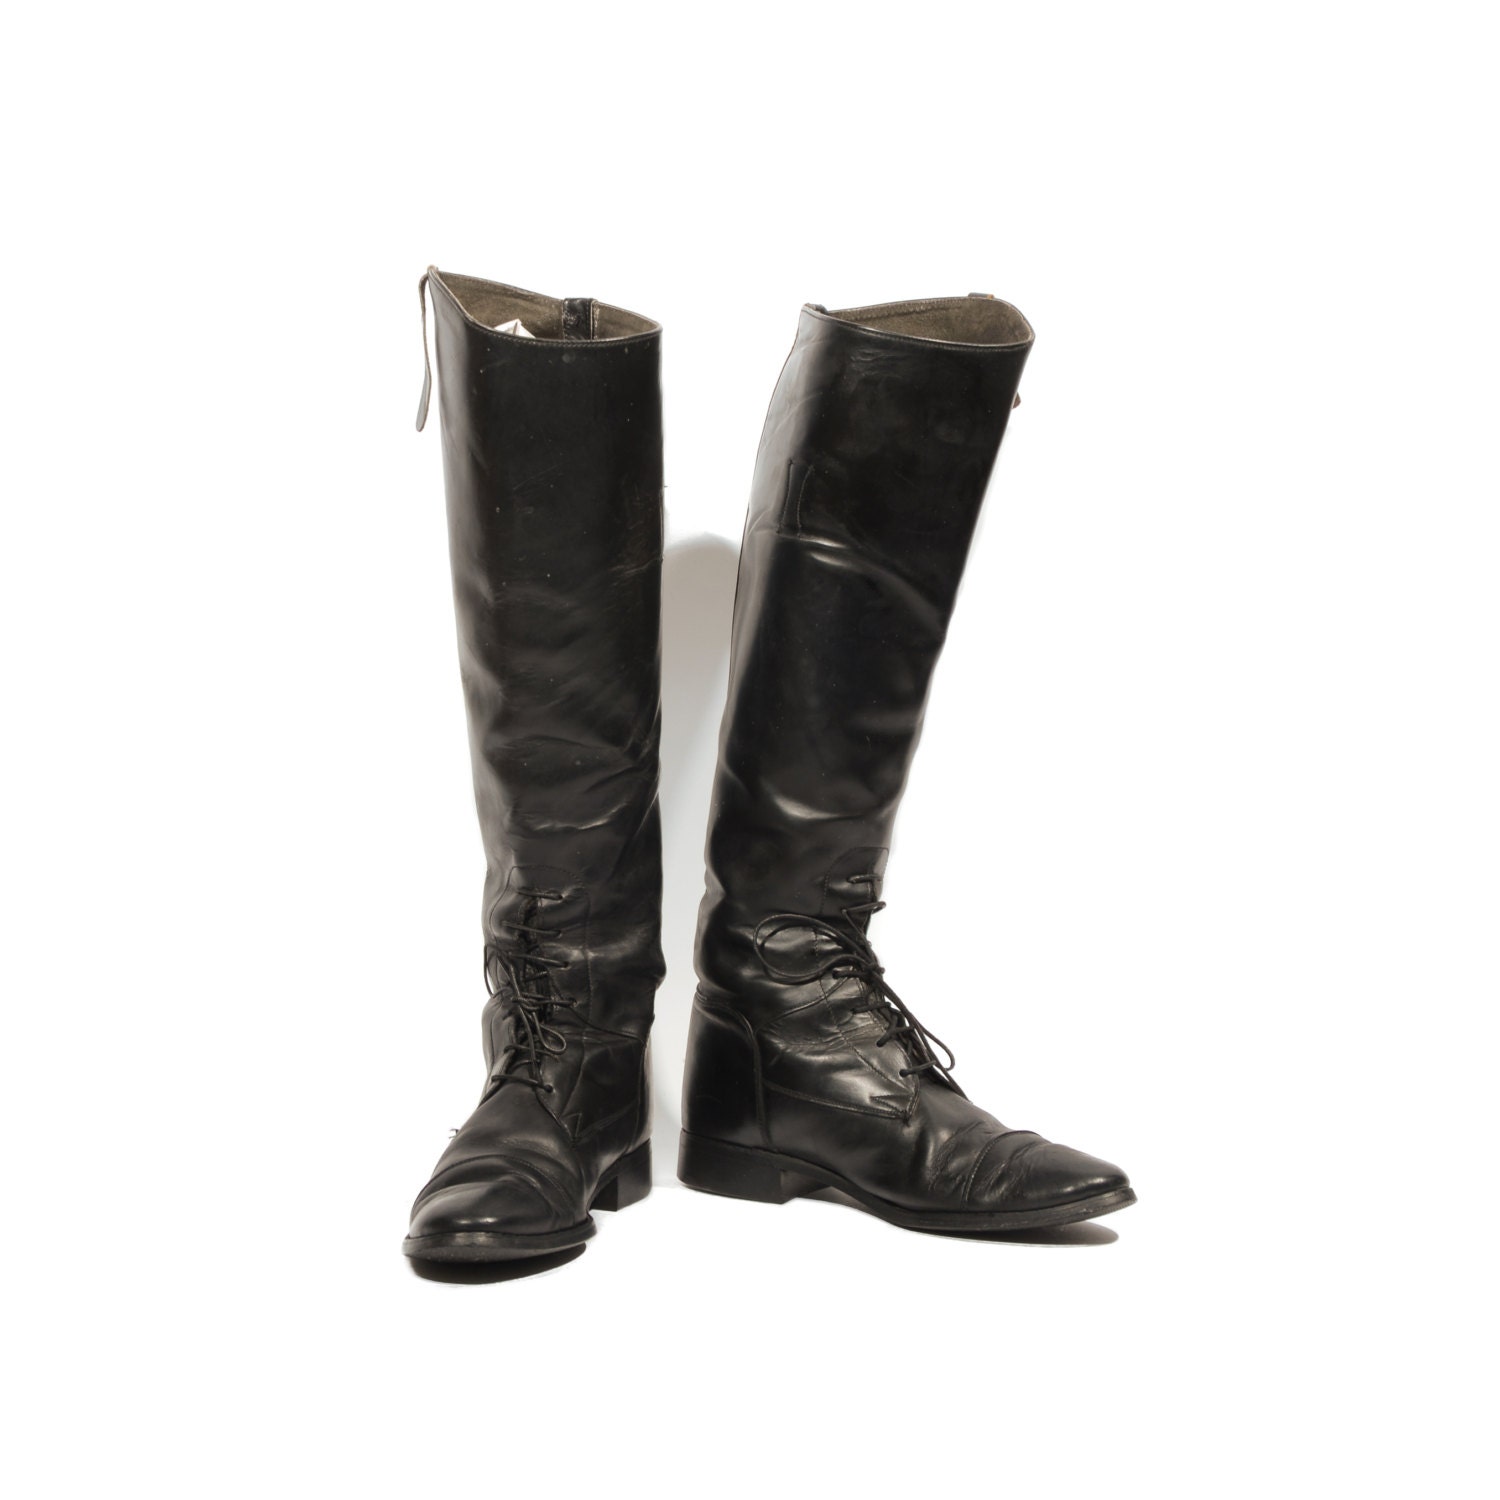 English Style Black Leather Riding Boots by RabbitHouseVintage